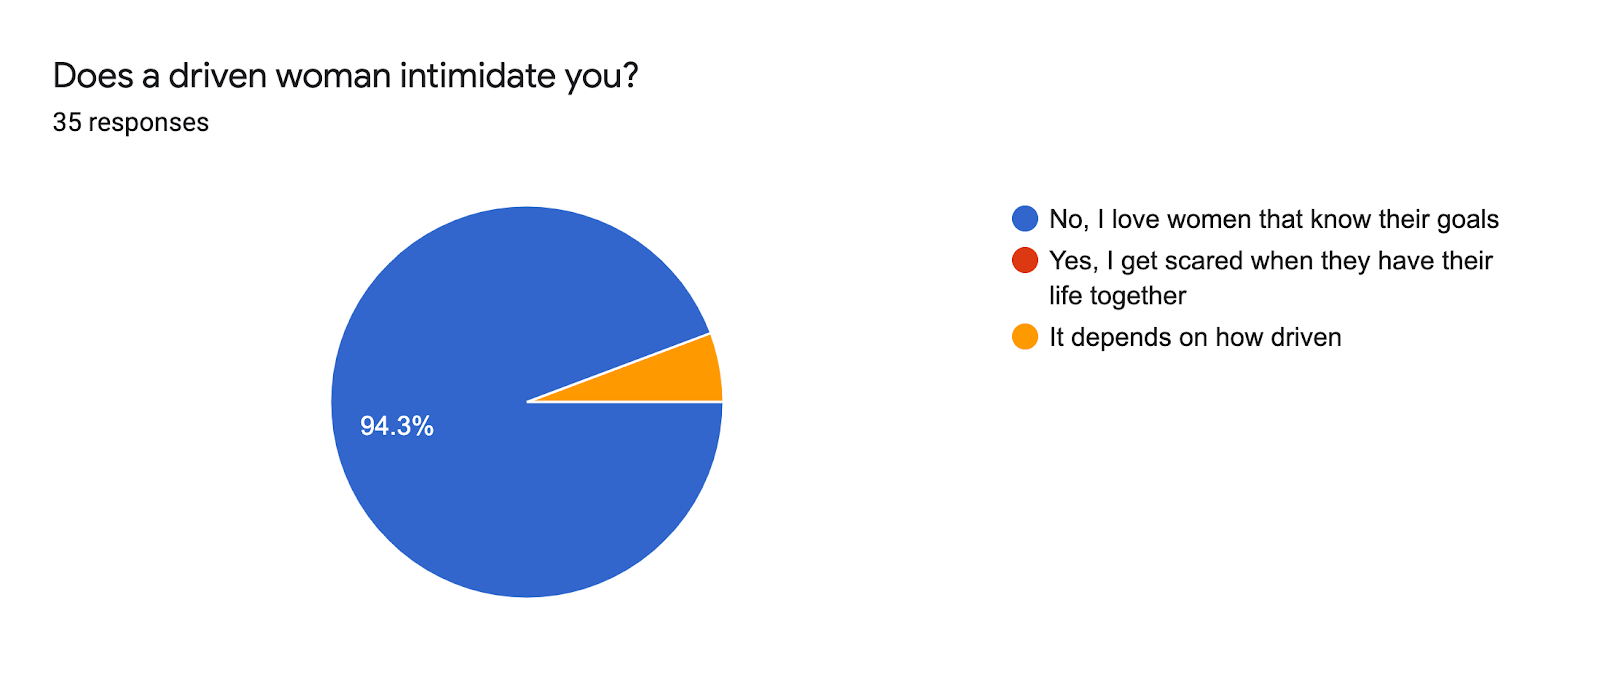 Forms response chart. Question title: Does a driven woman intimidate you?. Number of responses: 35 responses.